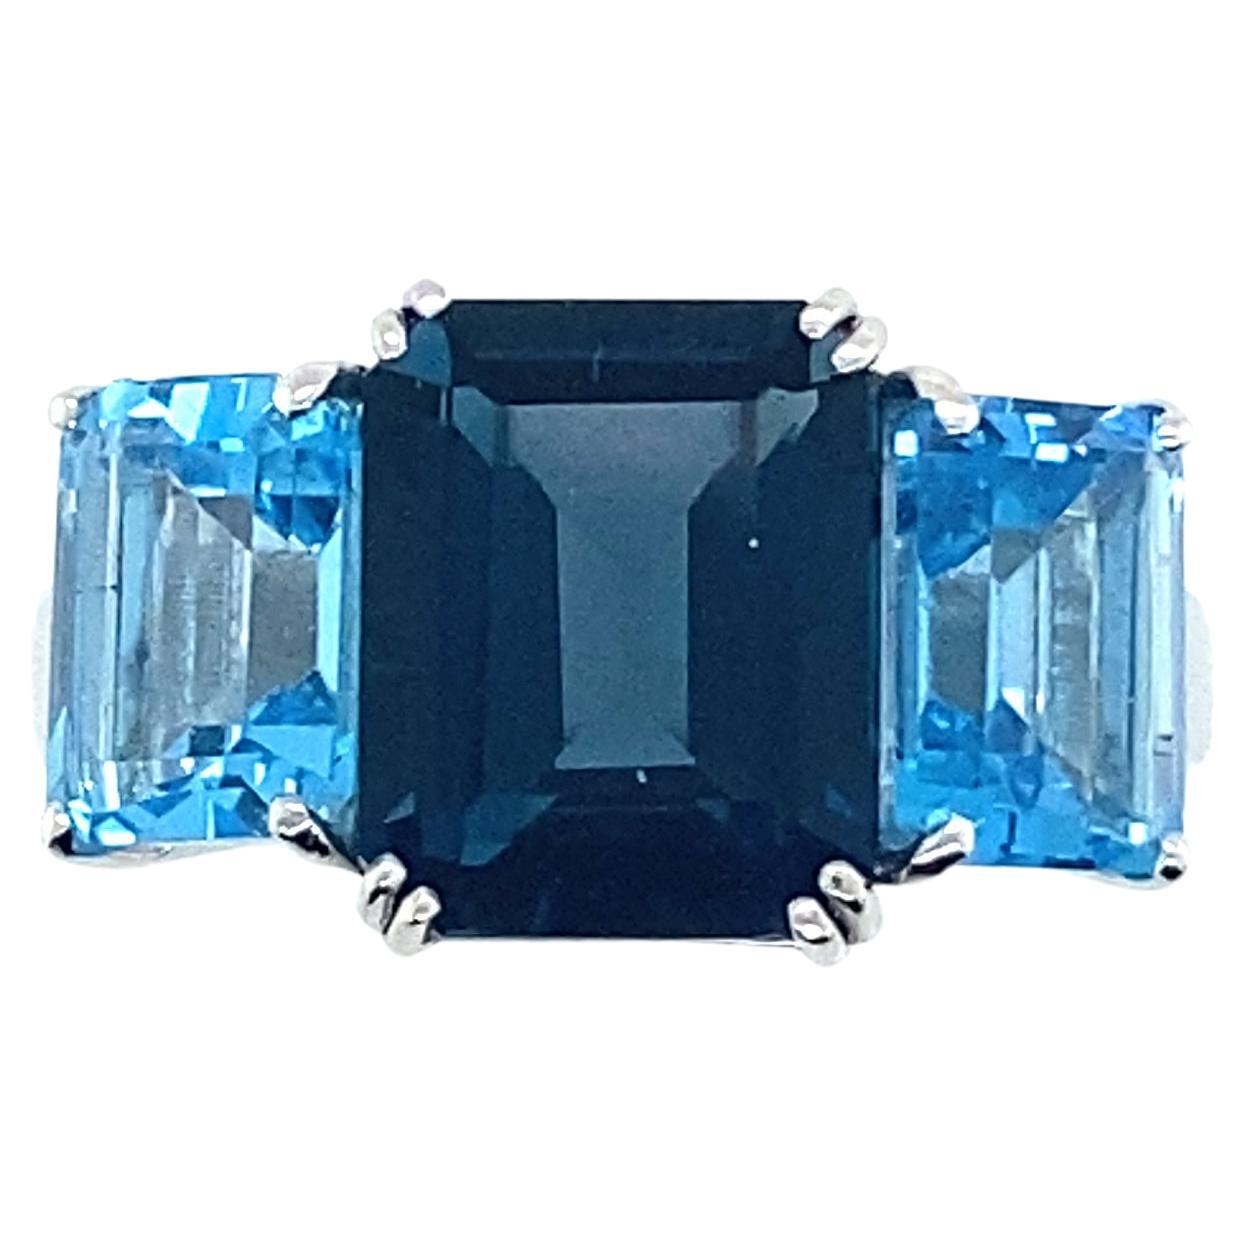 London Blue Topaz Emerald Cut Gold Ring.
Pretty art deco style ring in 18 carat white gold topped with a blue Topaz London centre stone and 2 Emerald Cut Blue Quartz stones. 

Weight: 5.41 grams gold 18 carats.
French size: 56
English size:P
US